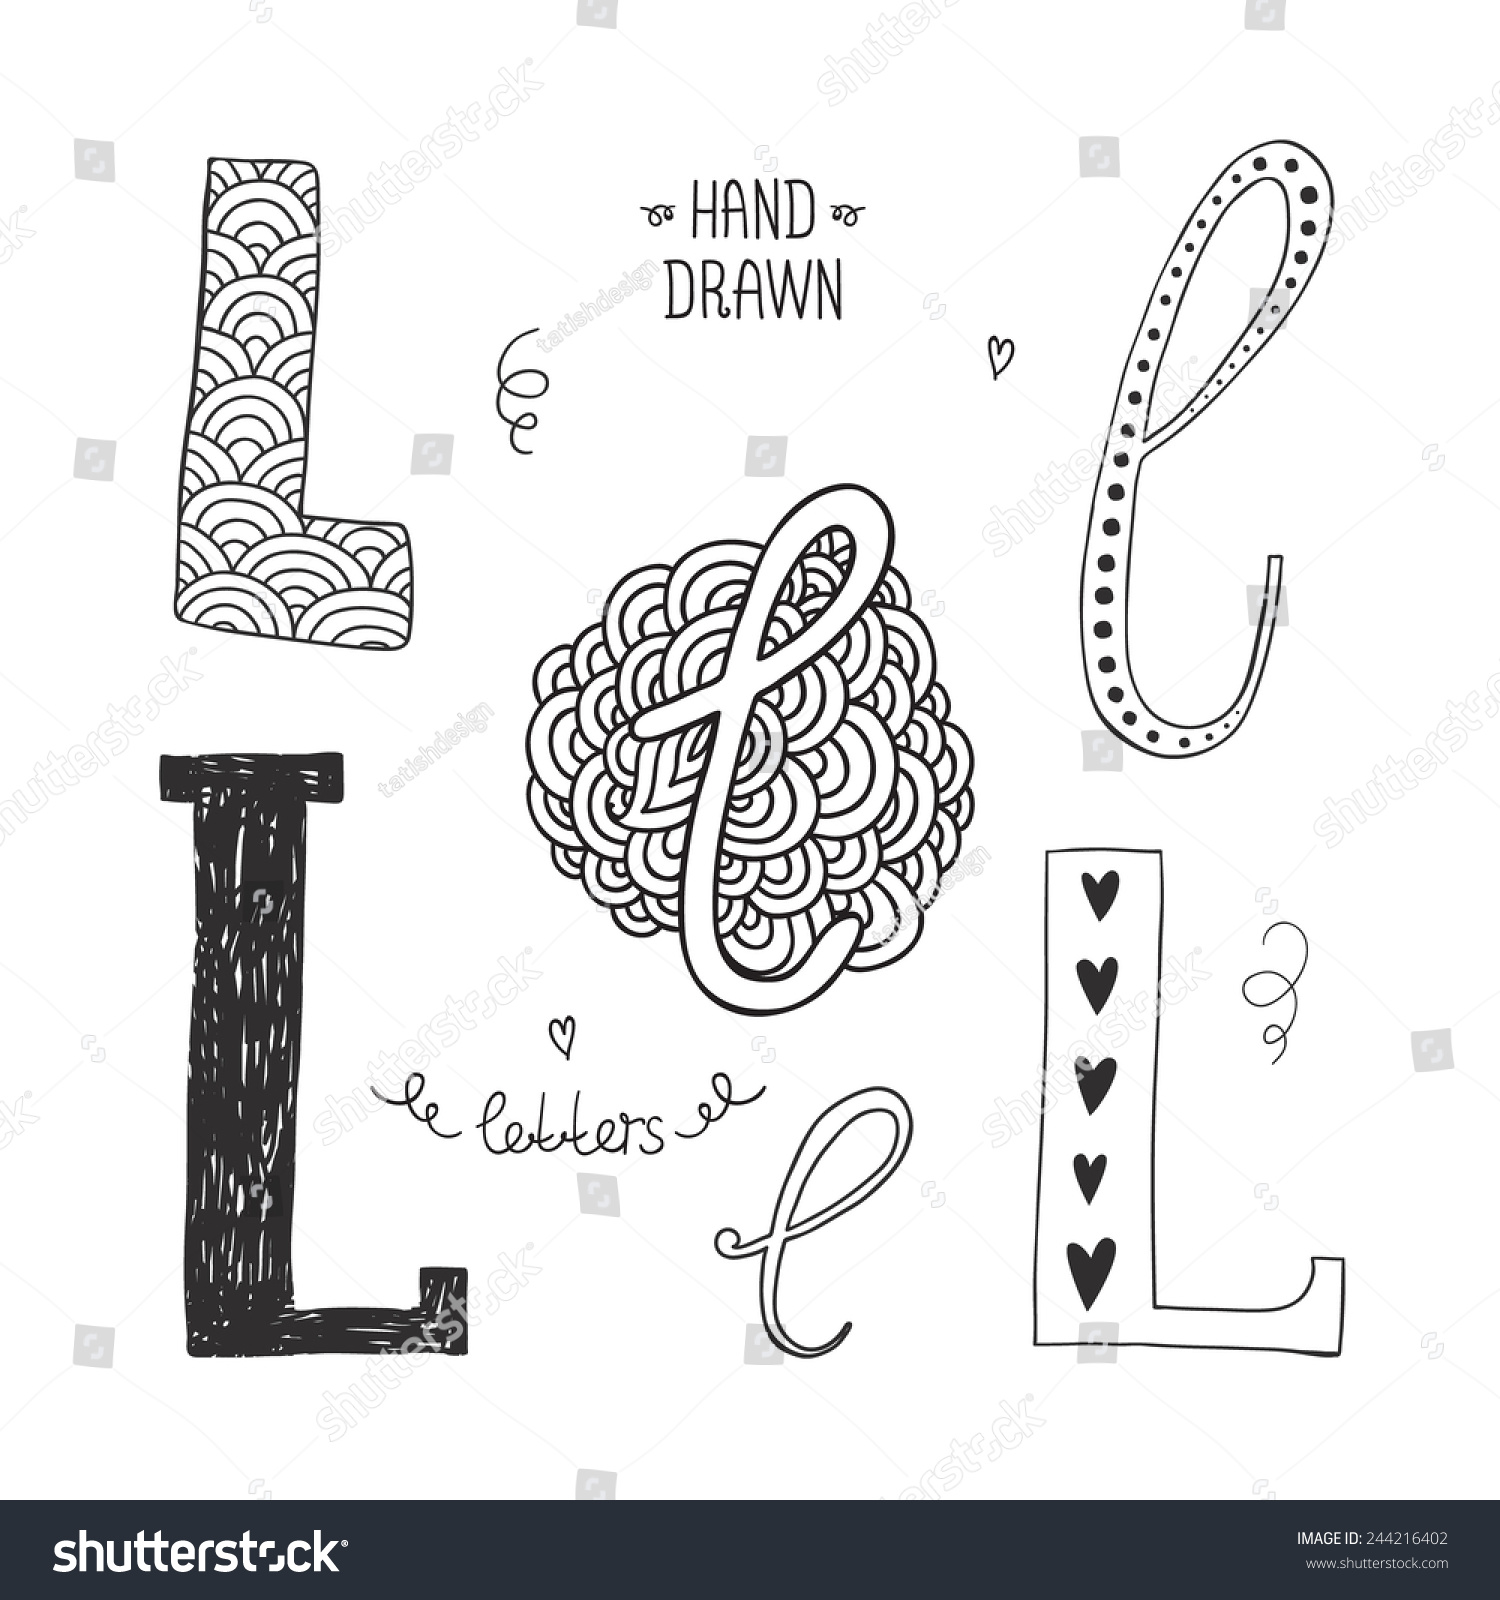 Vector Hand Drawn Alphabet Letter L Stock Vector (Royalty Free